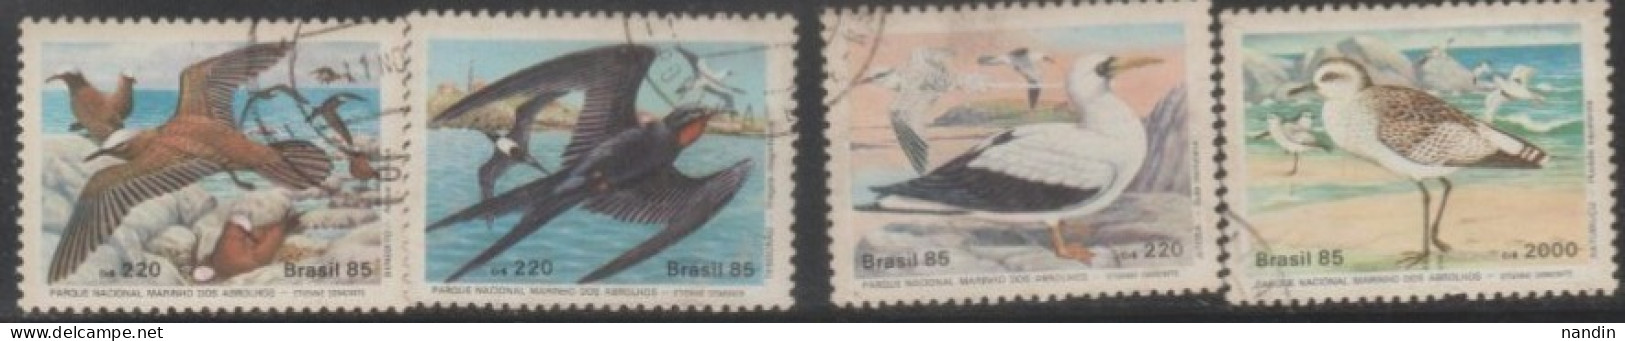 1985 BRAZIL USED STAMPS ON BIRD/ BIRDS FOUND IN NATIONAL MARINE PARK,ABROLHOS - Albatro & Uccelli Marini